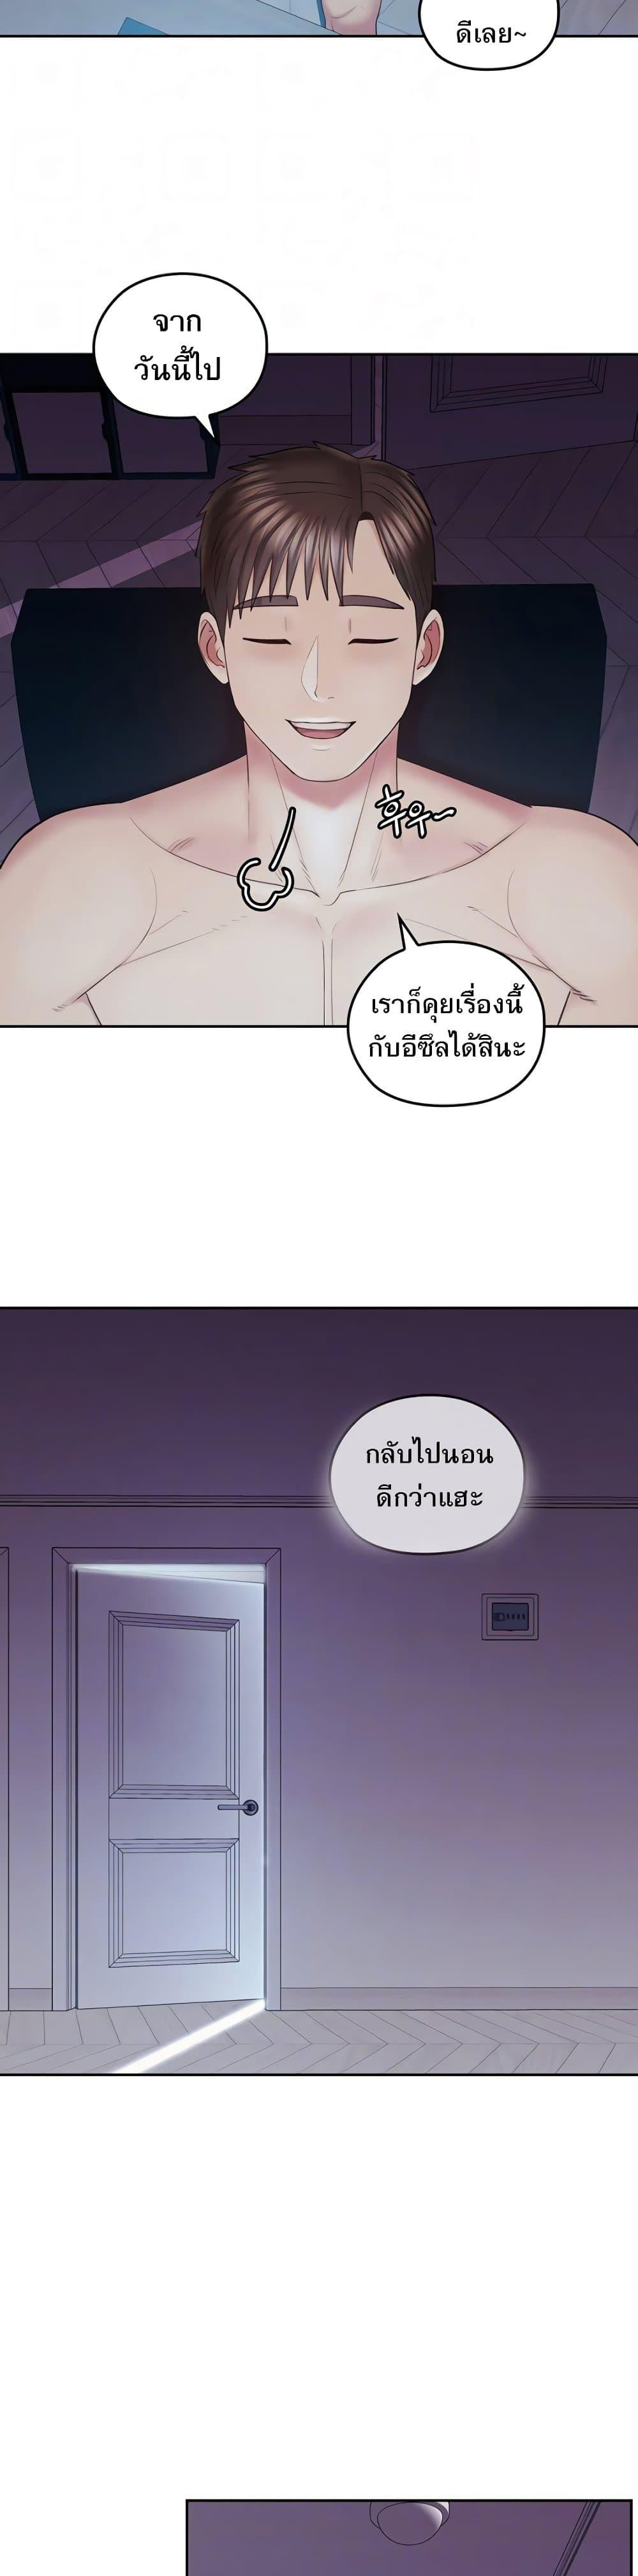 Sexual Consulting 2 ภาพ 7